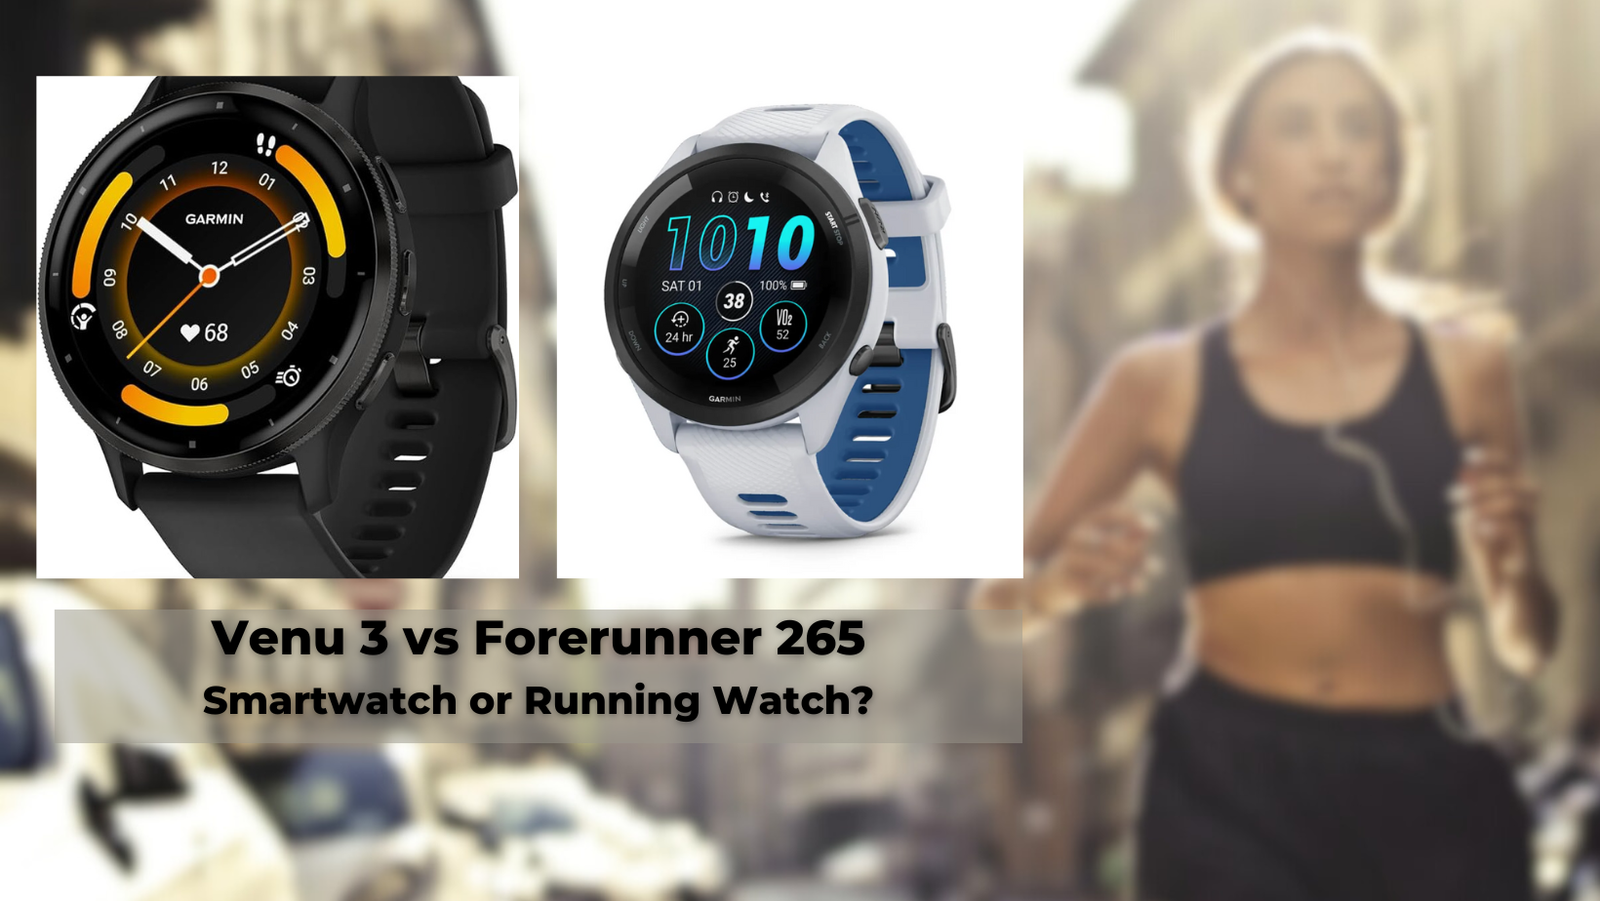 Pictures of a Garmin Venu 3 and a Forerunner 265, with the caption "Smartwatch or Running watch?"